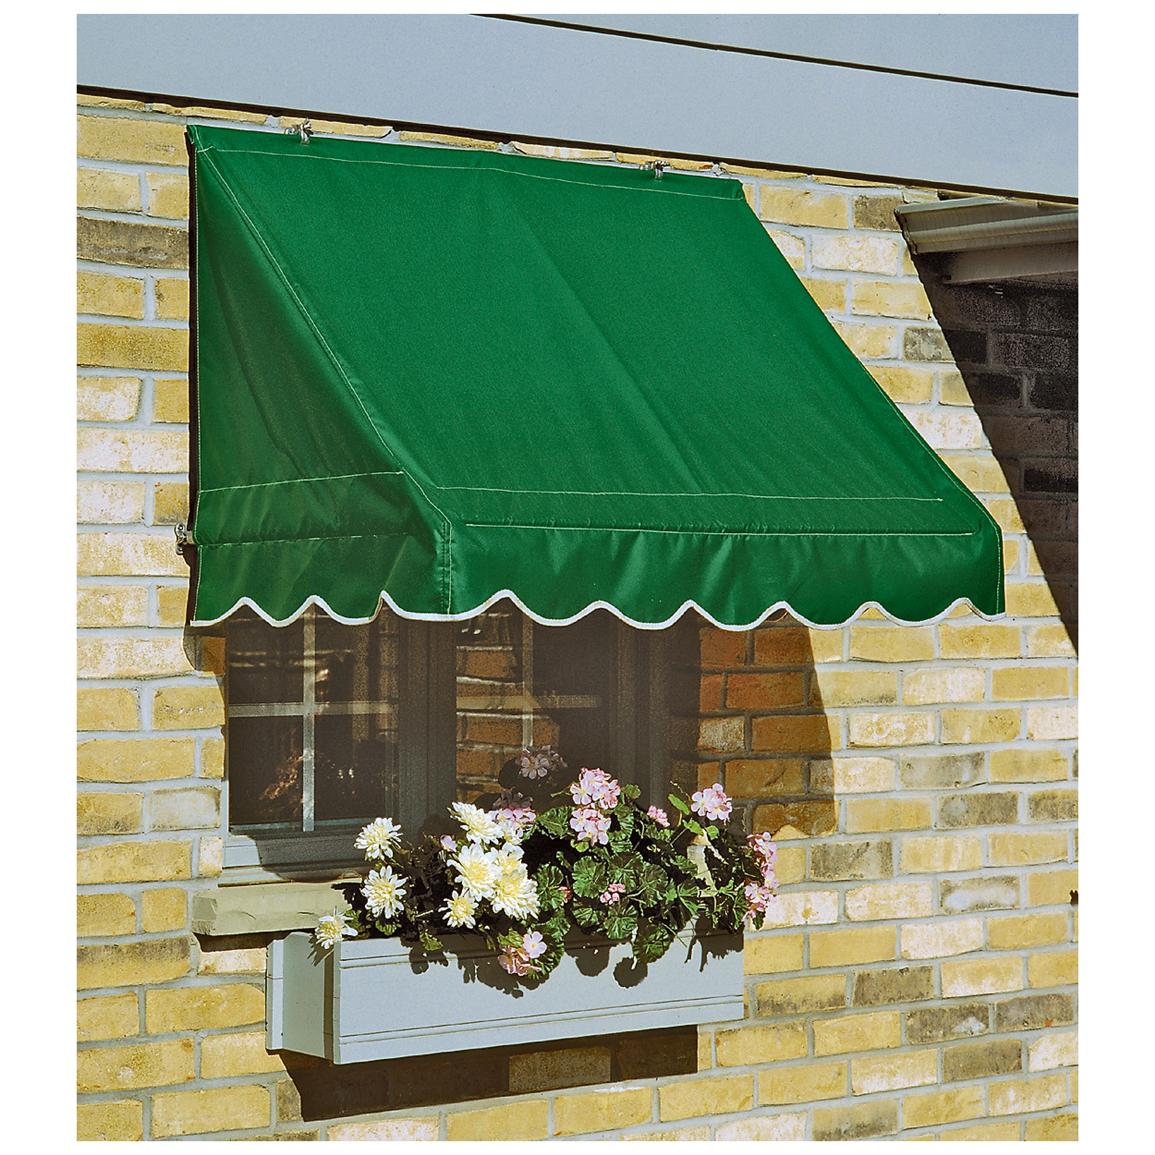 CASTLECREEK 6 Window And Door Awning 581817 Awnings Shades At